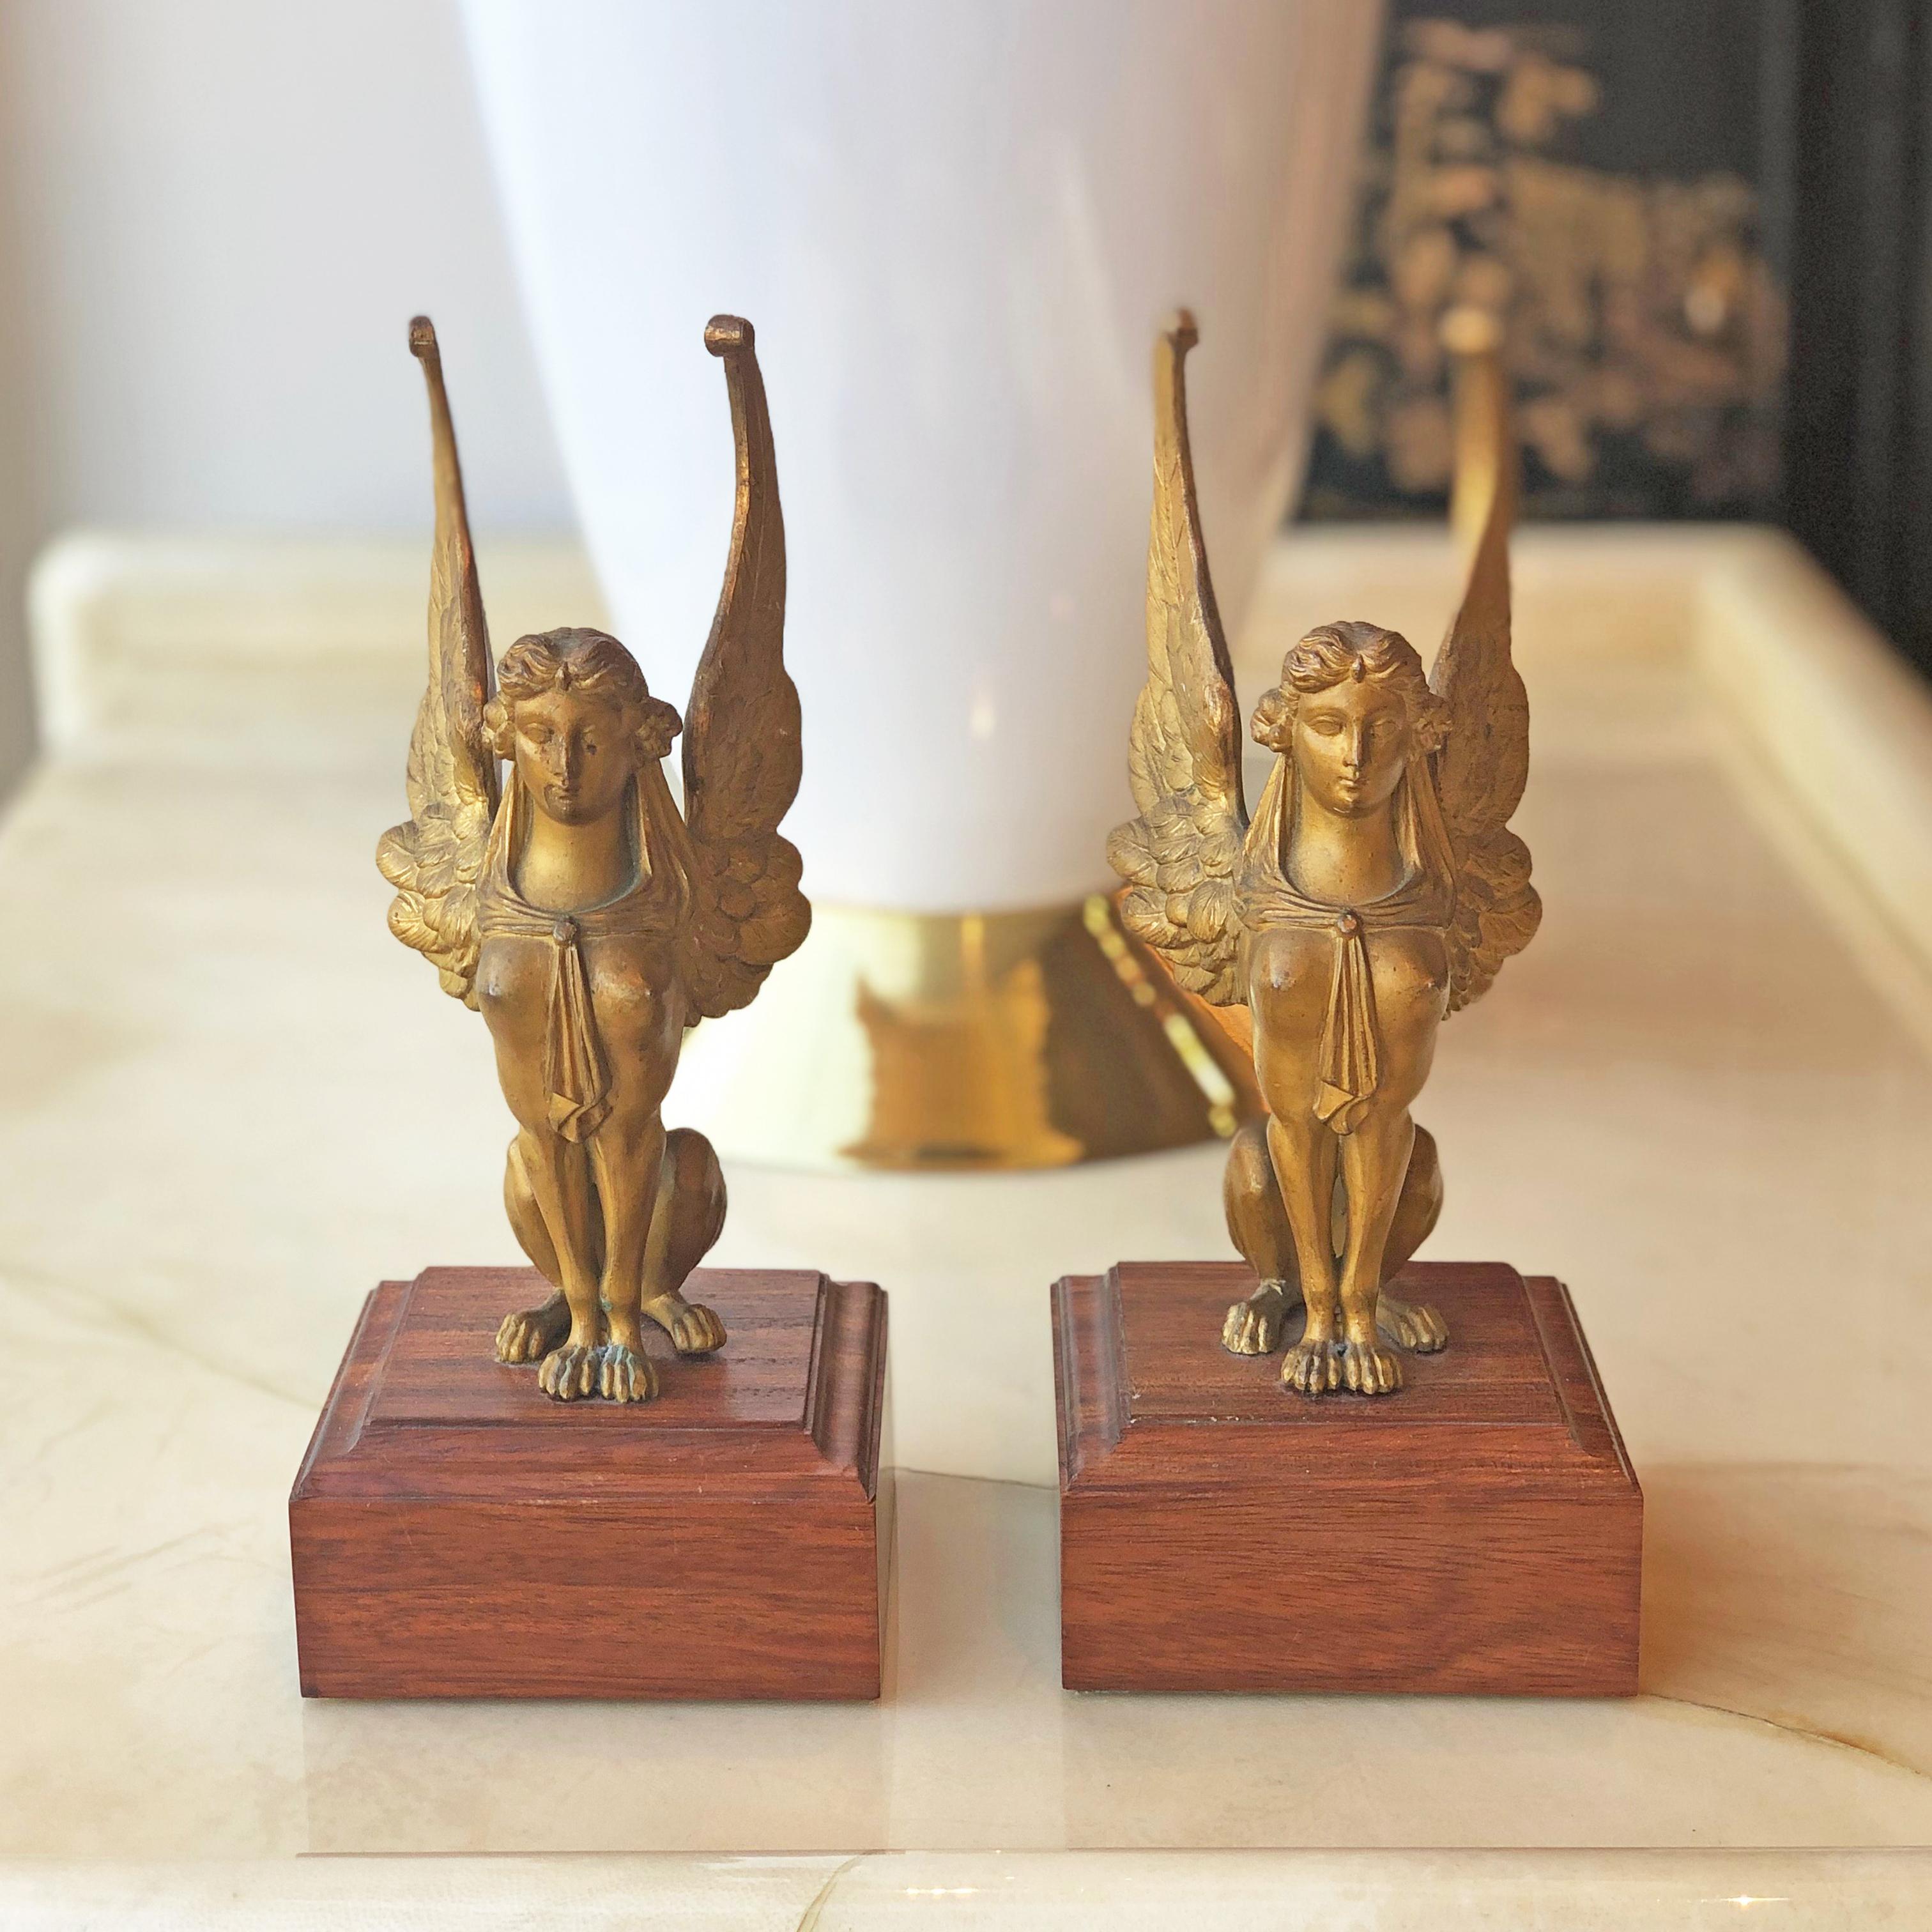 A pair of neoclassical style gilt (zinc casting) Sphinx bookends, mounted on square wooden plinth. Sold as a pair.

Measures: 10 W x 10 D x 23 H cm.

Good vintage condition.